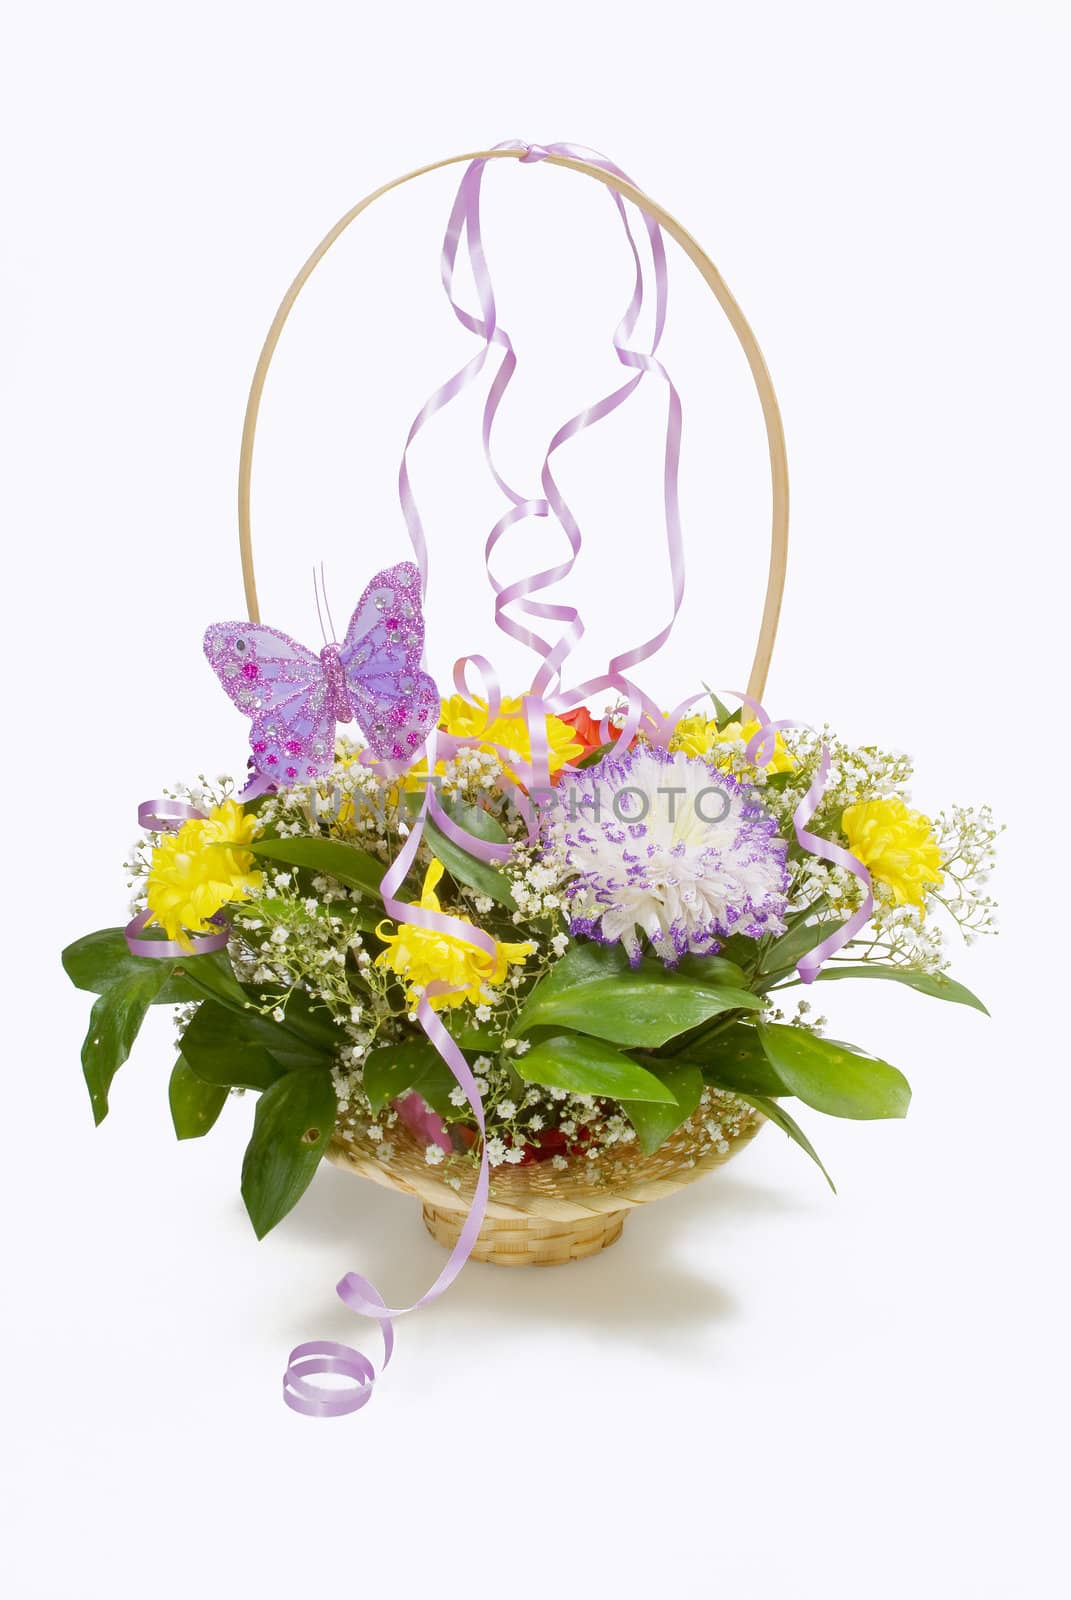 Basket of flowers with a butterfly and ribbons by BIG_TAU